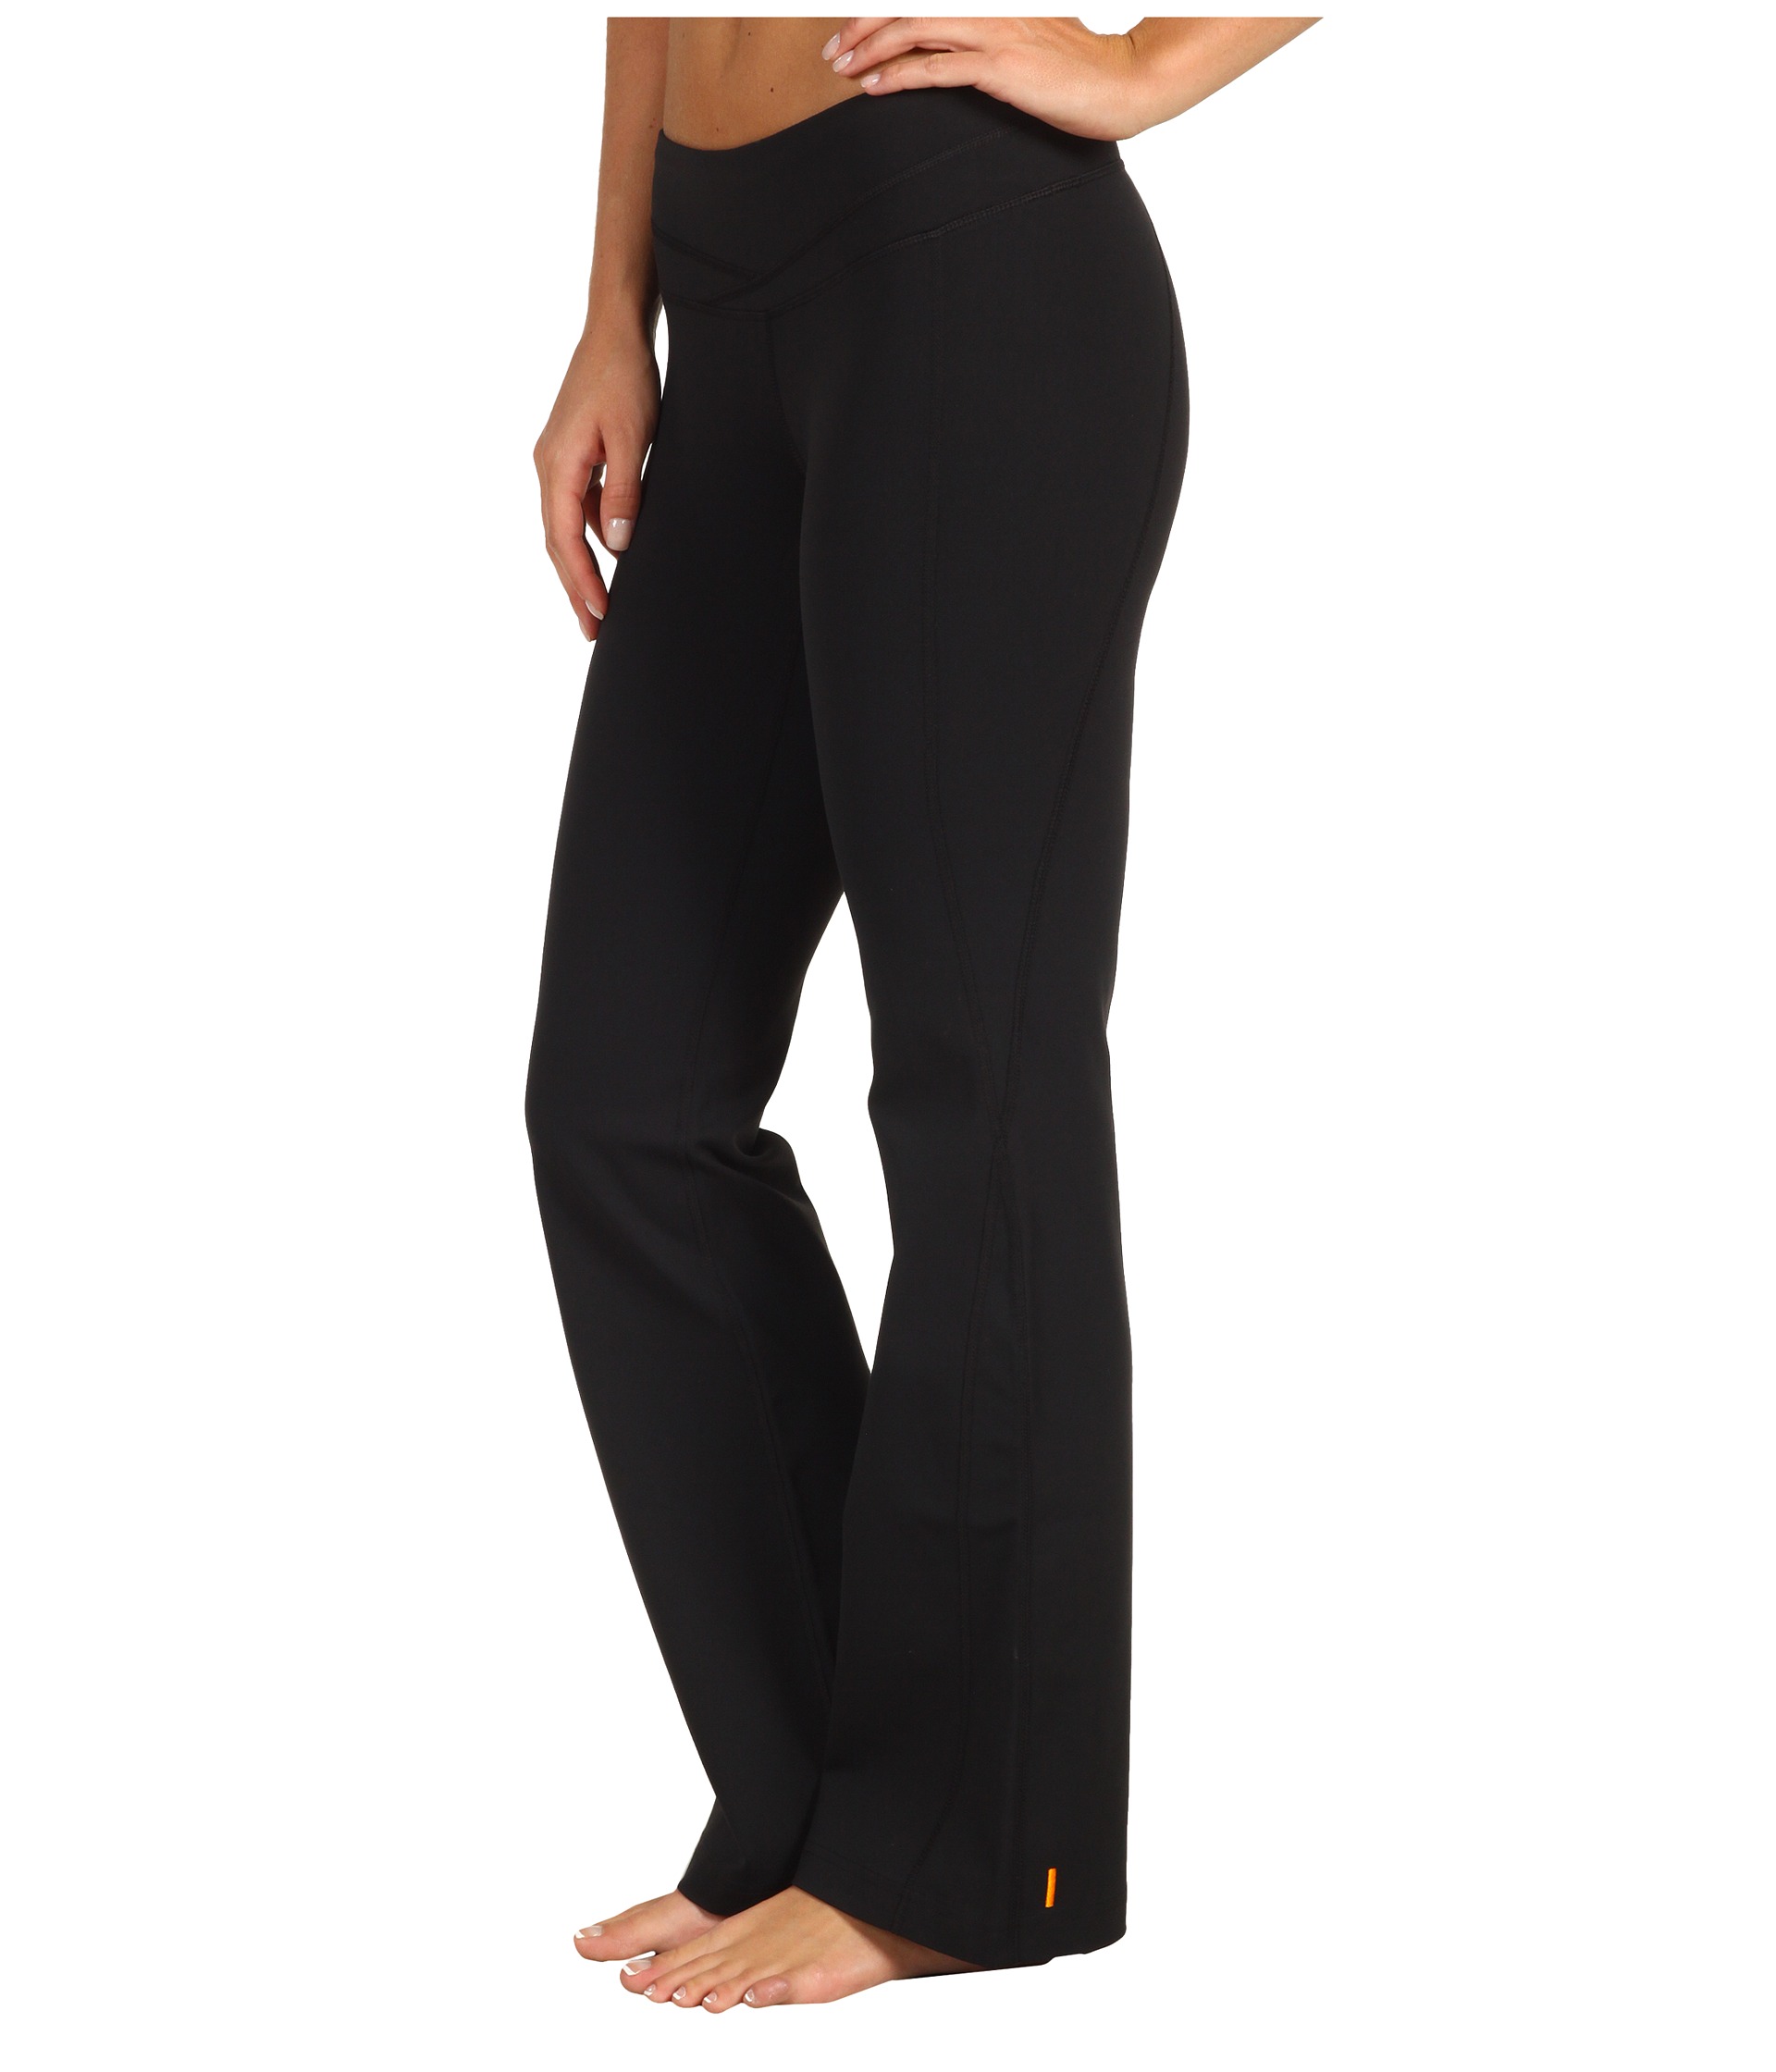 Lucy Hatha Pant - Zappos.com Free Shipping BOTH Ways